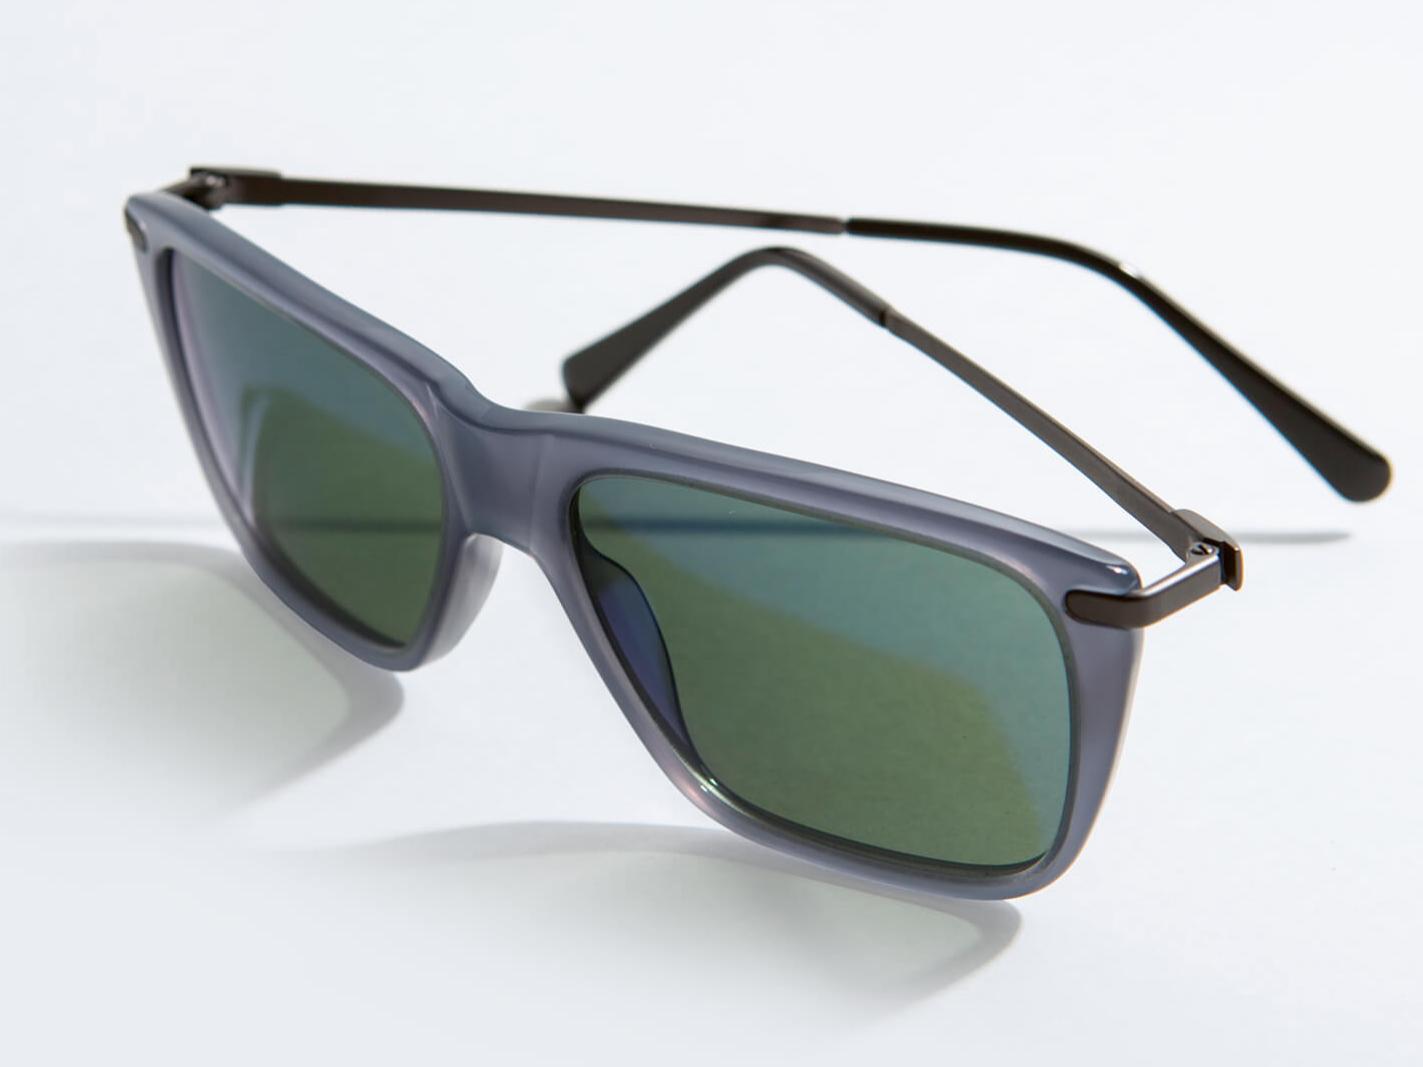 ZEISS Sunglass lenses – Your perfect companion in the sun